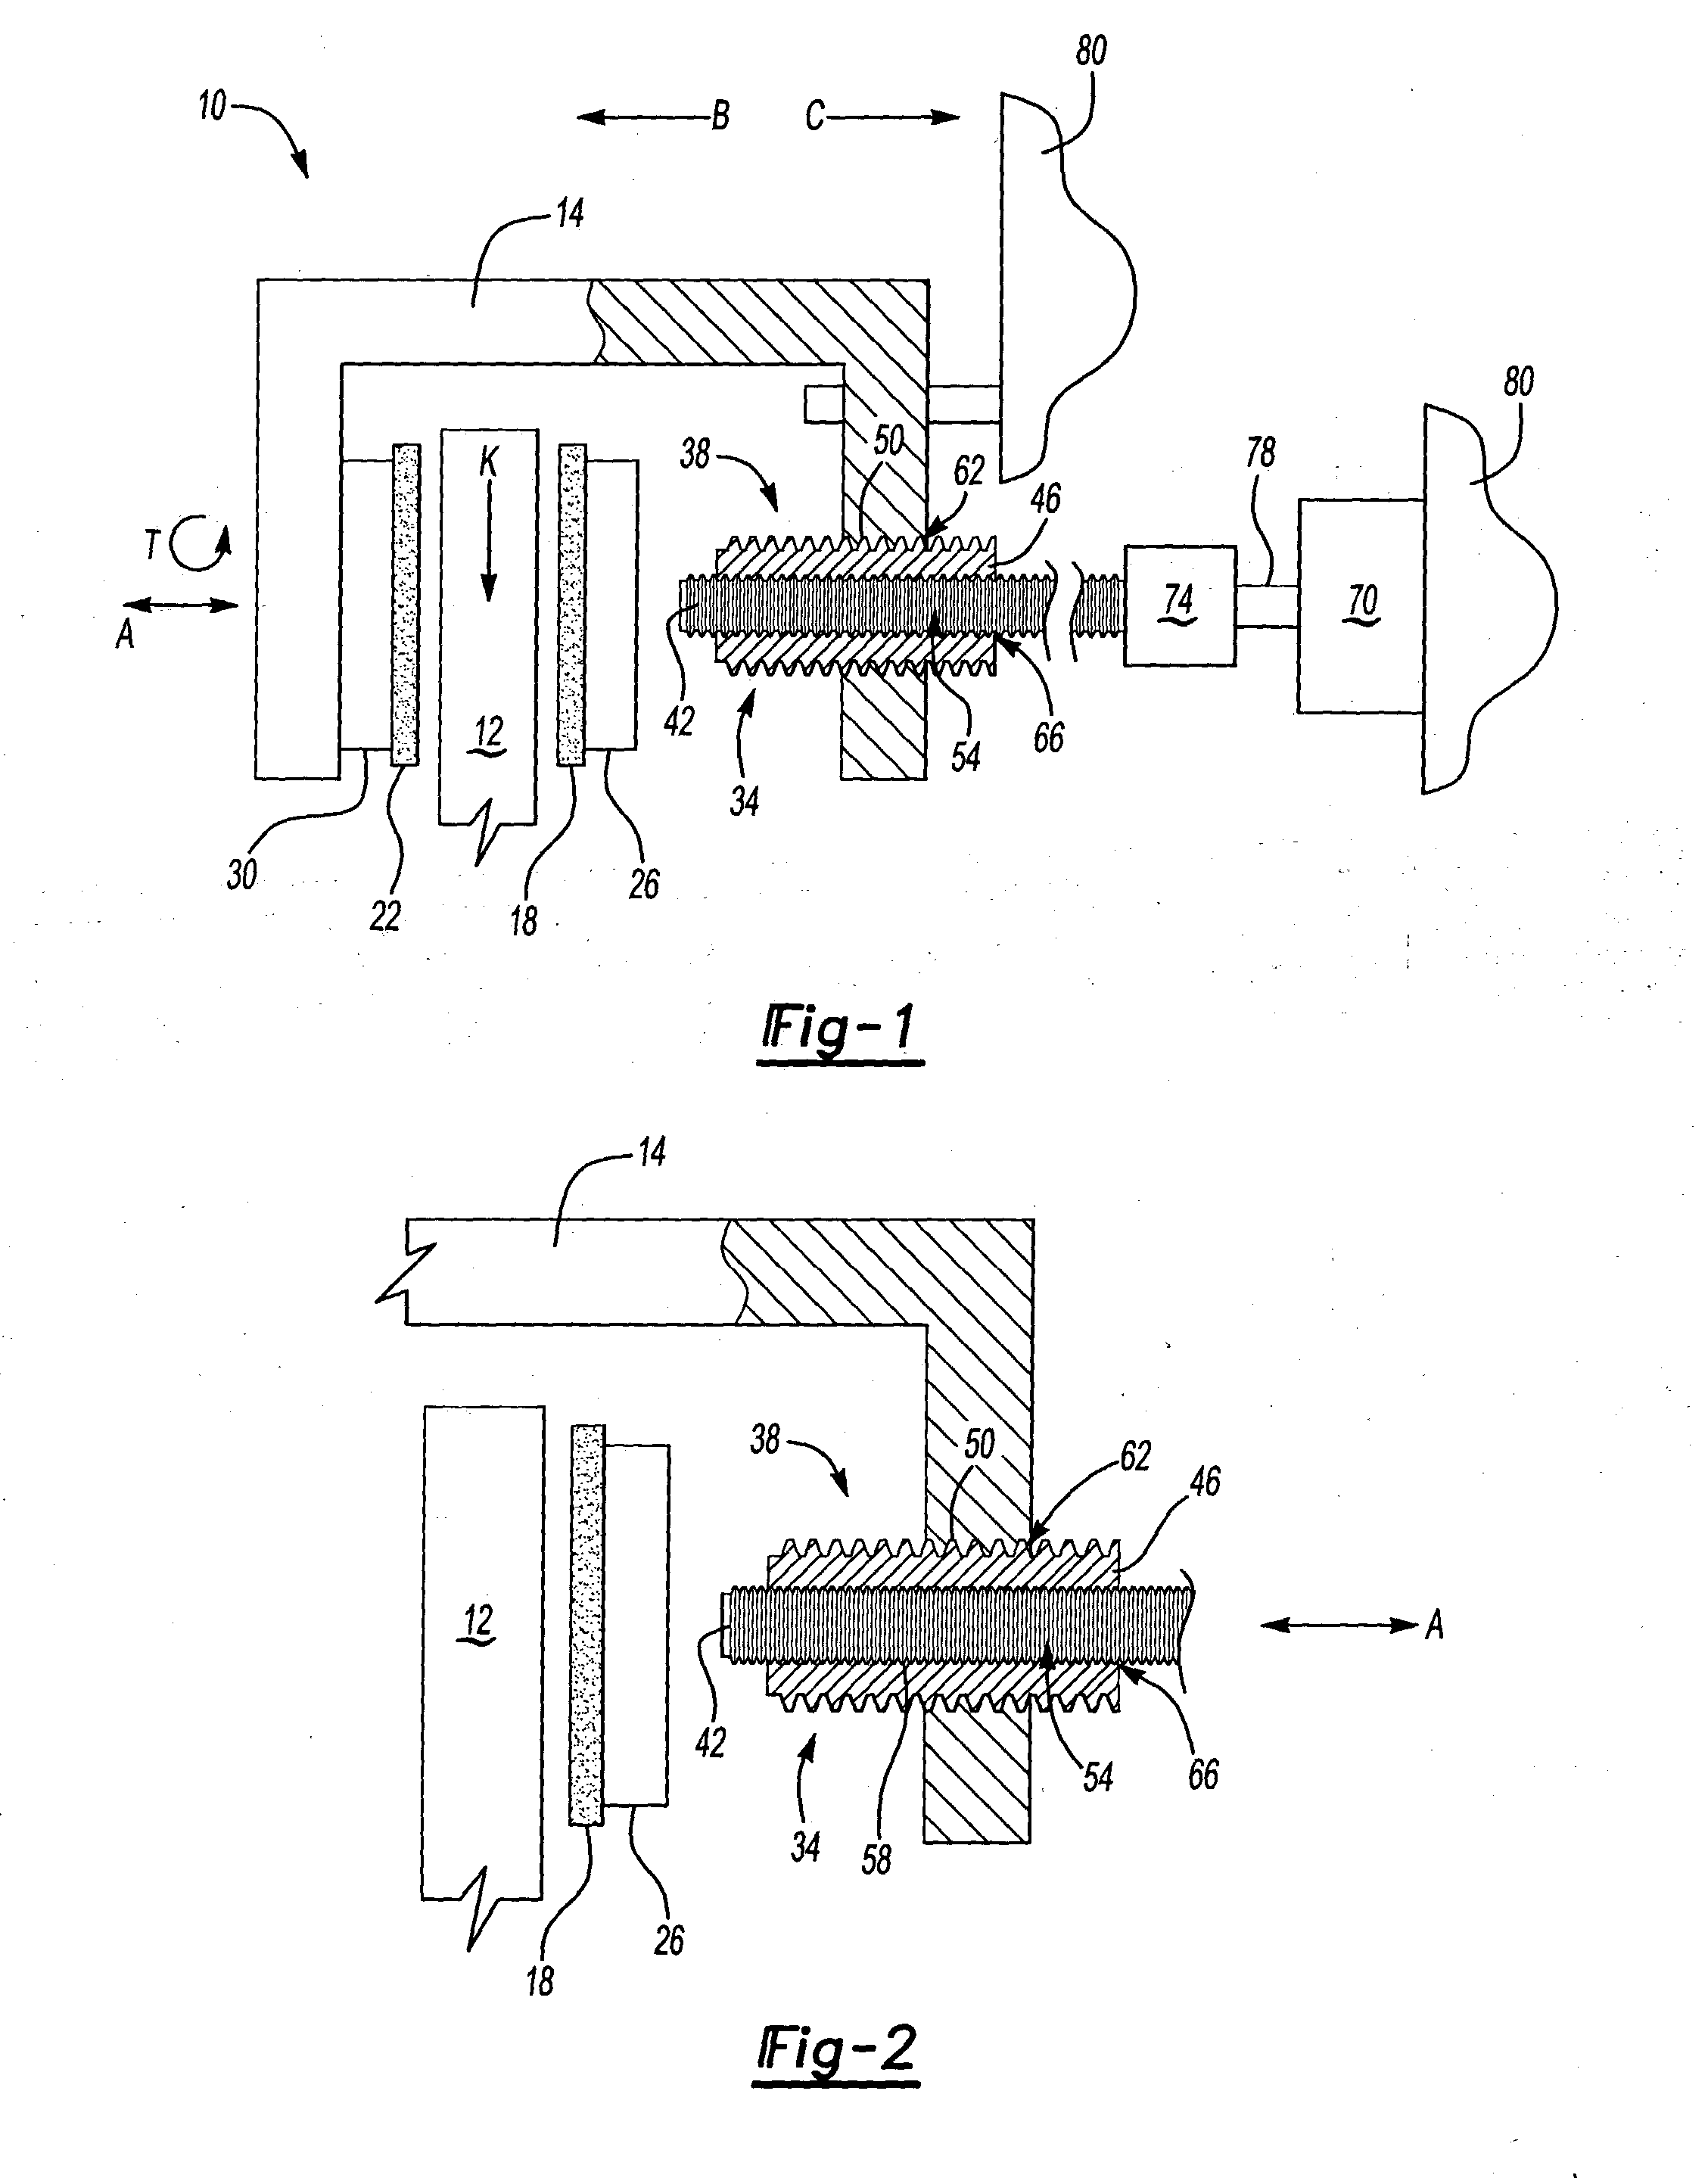 Multiple ball screw assembly with differing pitch used to optimize force and displacement of brake actuator